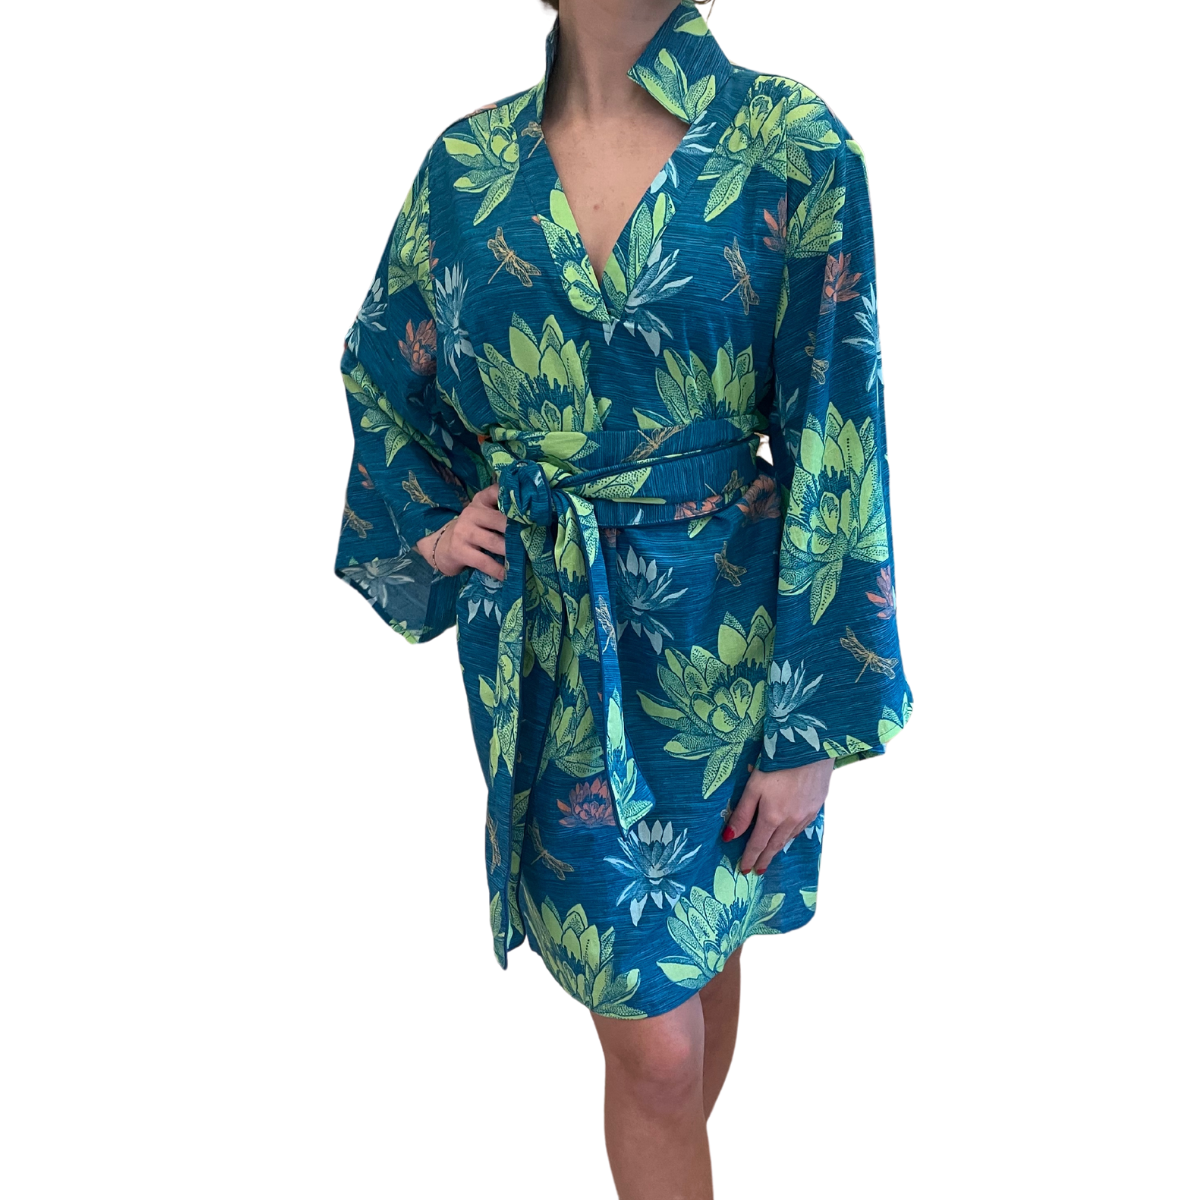 Holly Shae - Cece Dress/Cover up - Lotus Love